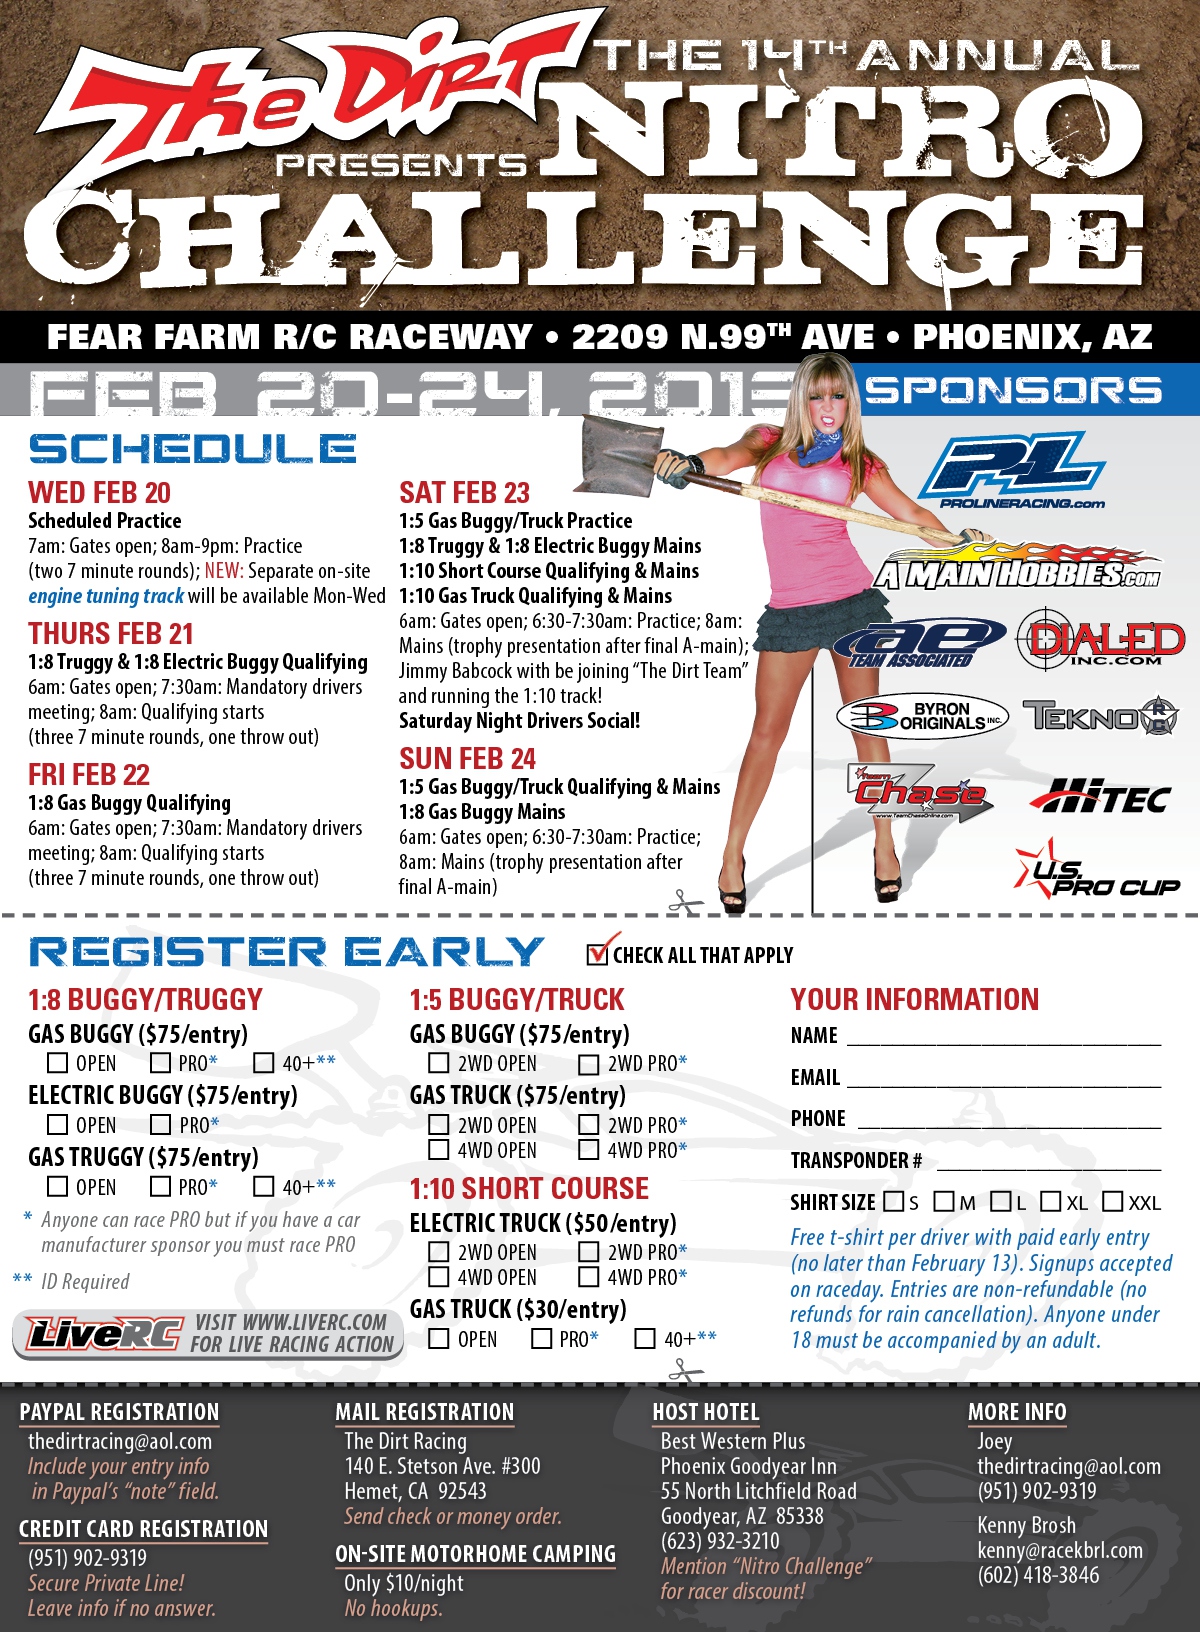 The Dirt Presents the 14th Annual Nitro Challenge